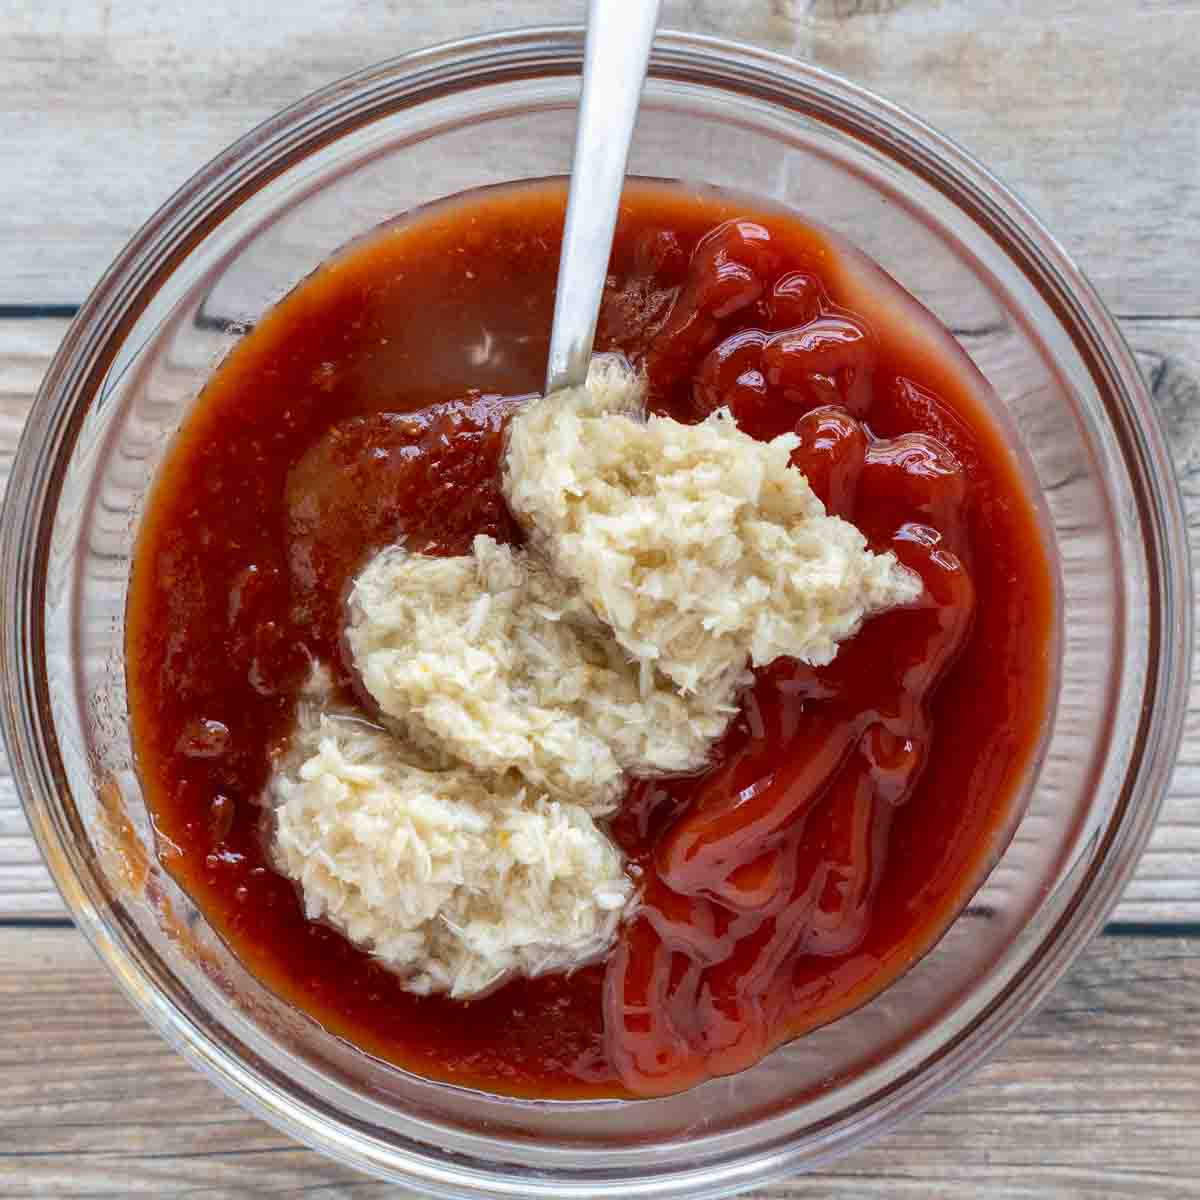 horseradish added to the bowl of ketchup an chili sauce